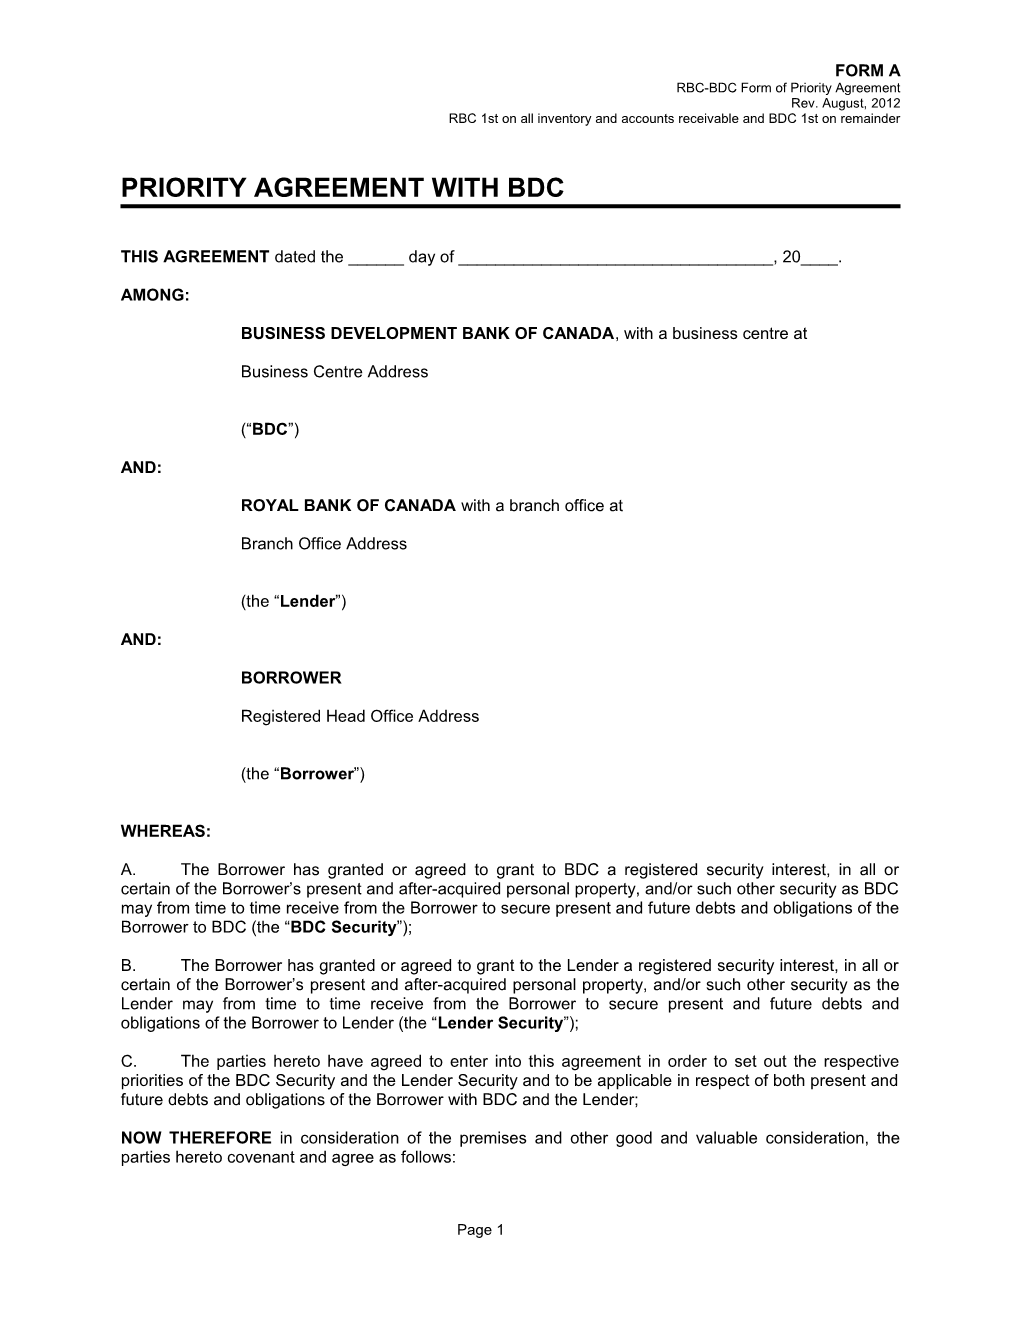 Priority Agreement with BDC